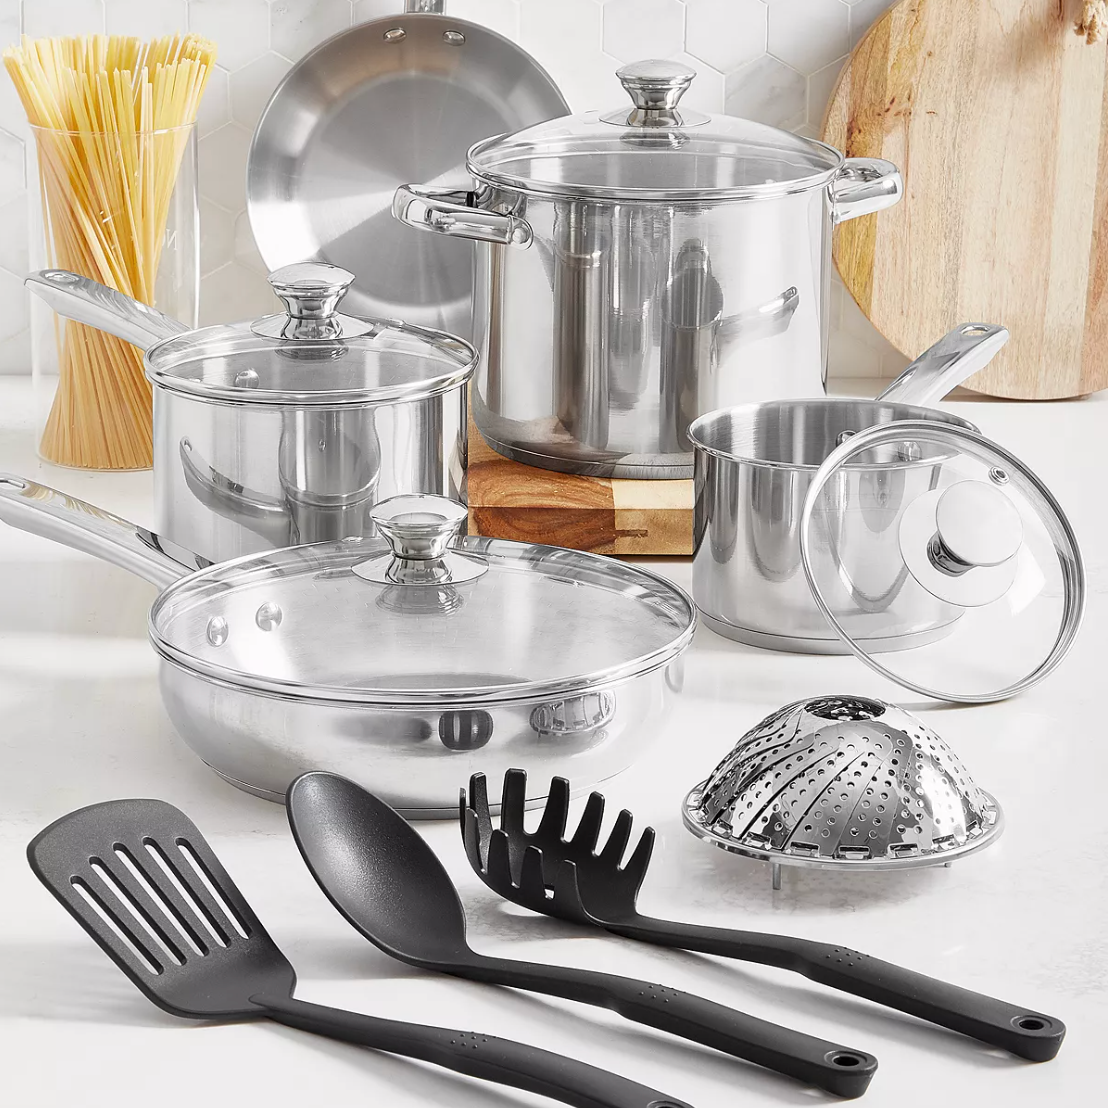 8 cookware sets on sale to help you upgrade your kitchen in a